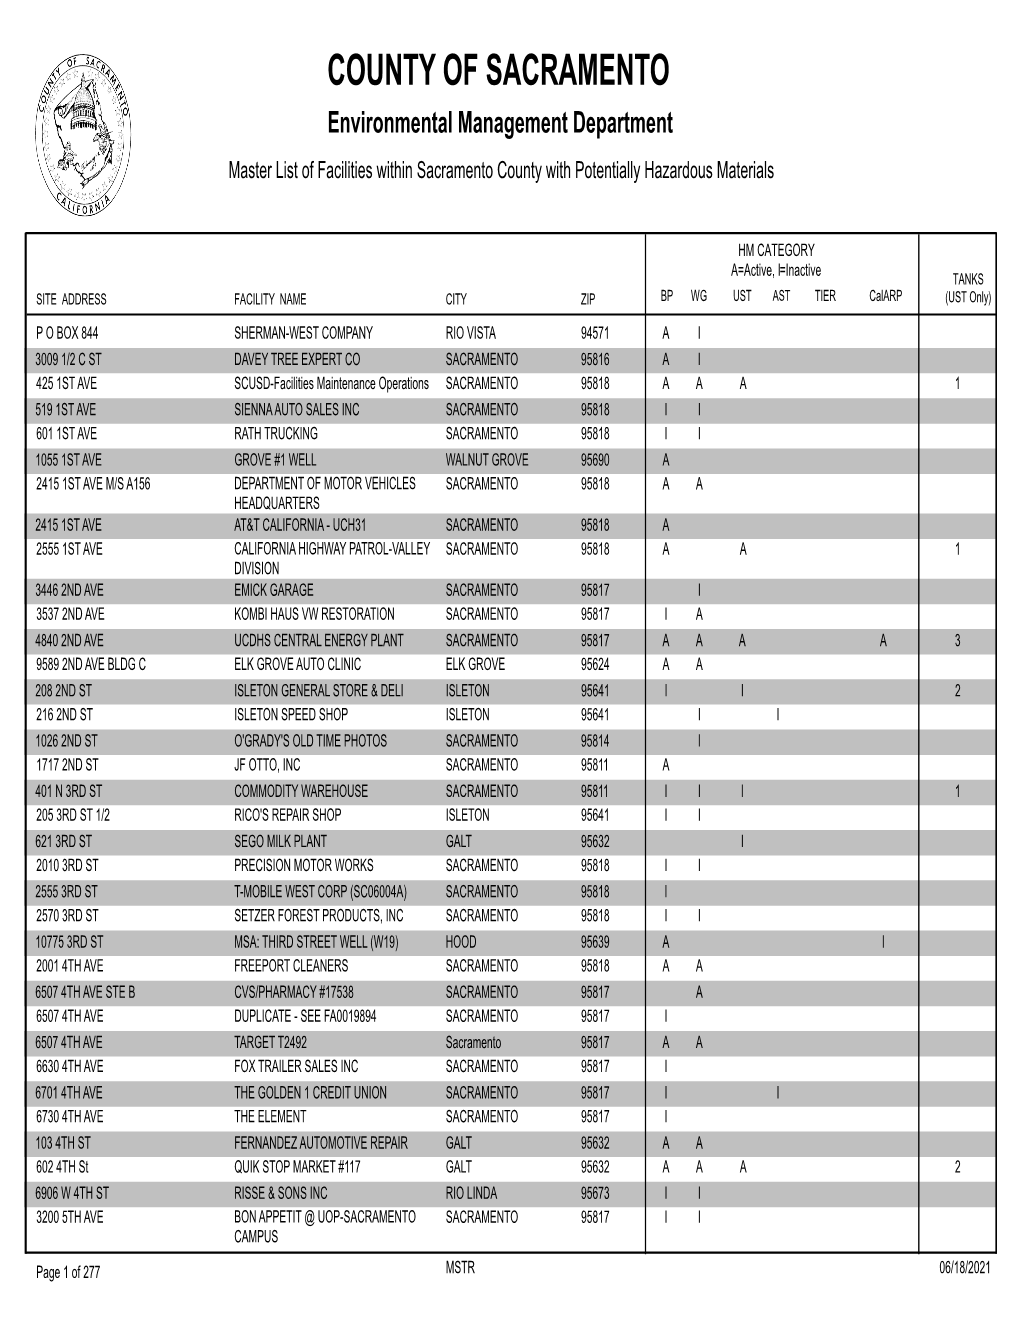 MSTR 06/18/2021 Master List of Facilities Within Sacramento County with Potentially Hazardous Materials